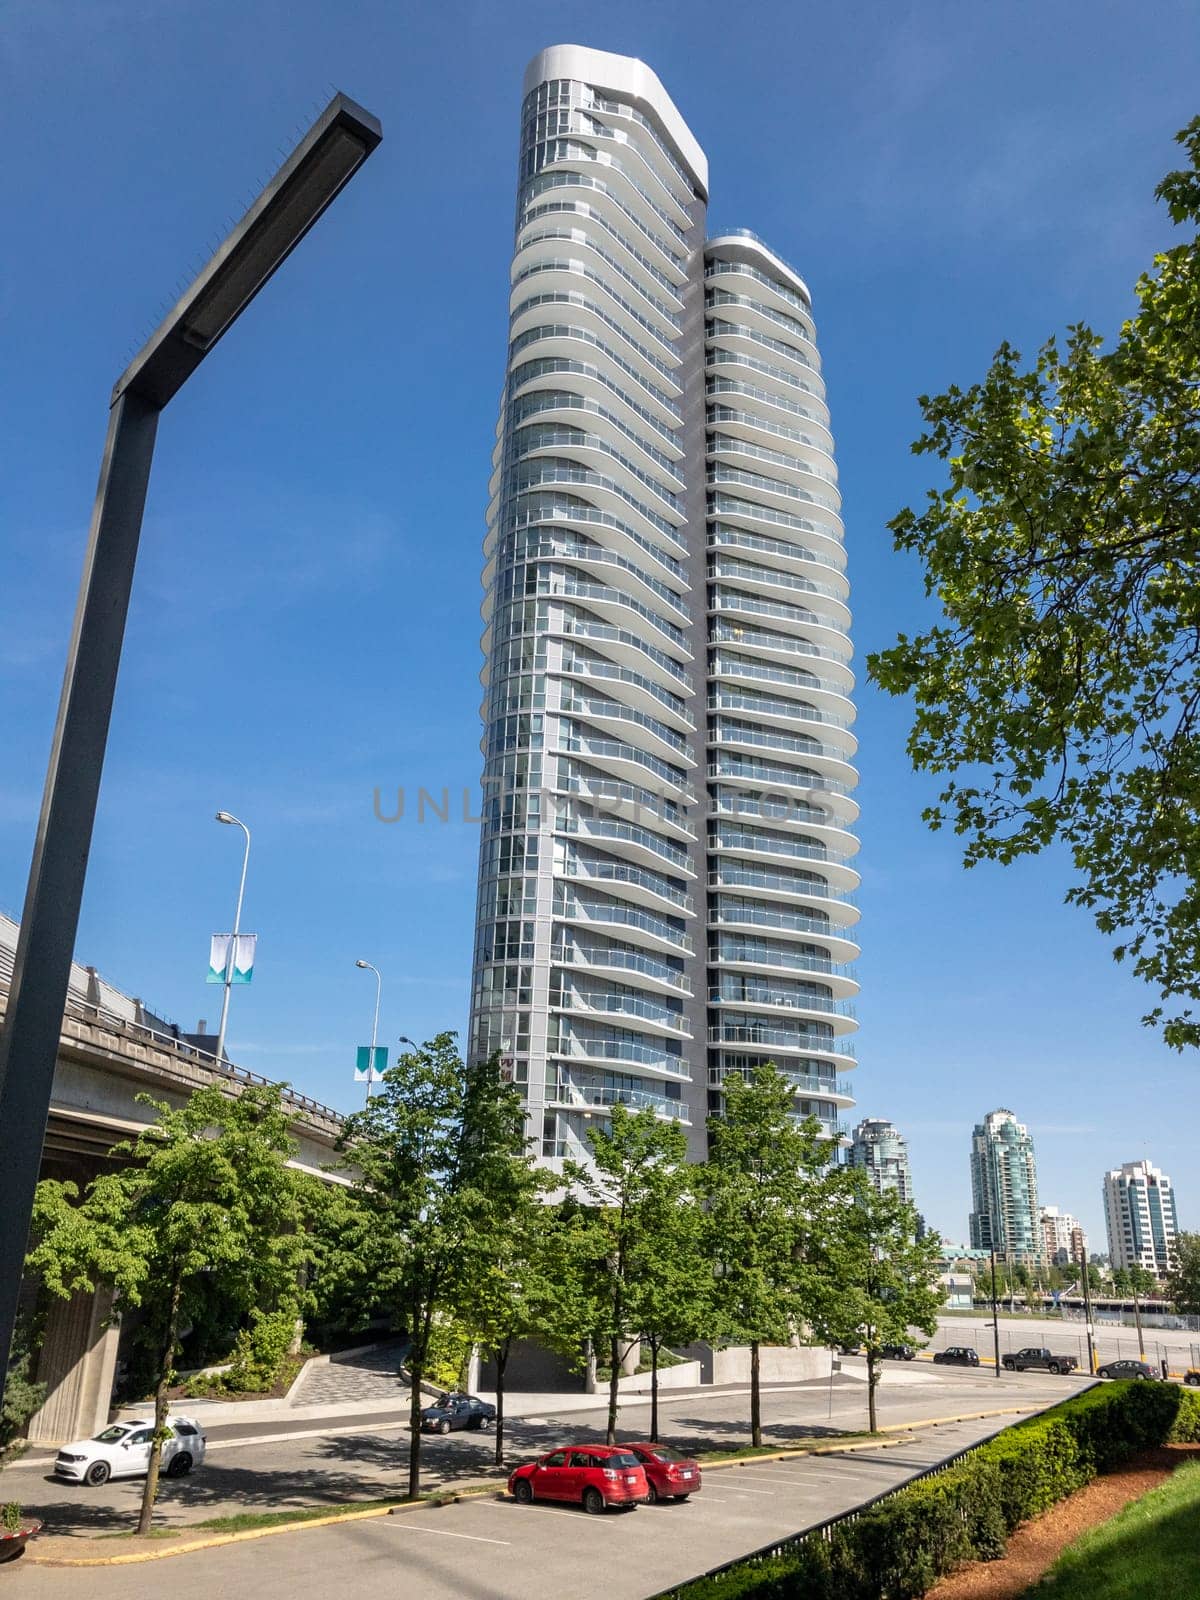 Urban area around high-rise residential tower on blue sky background